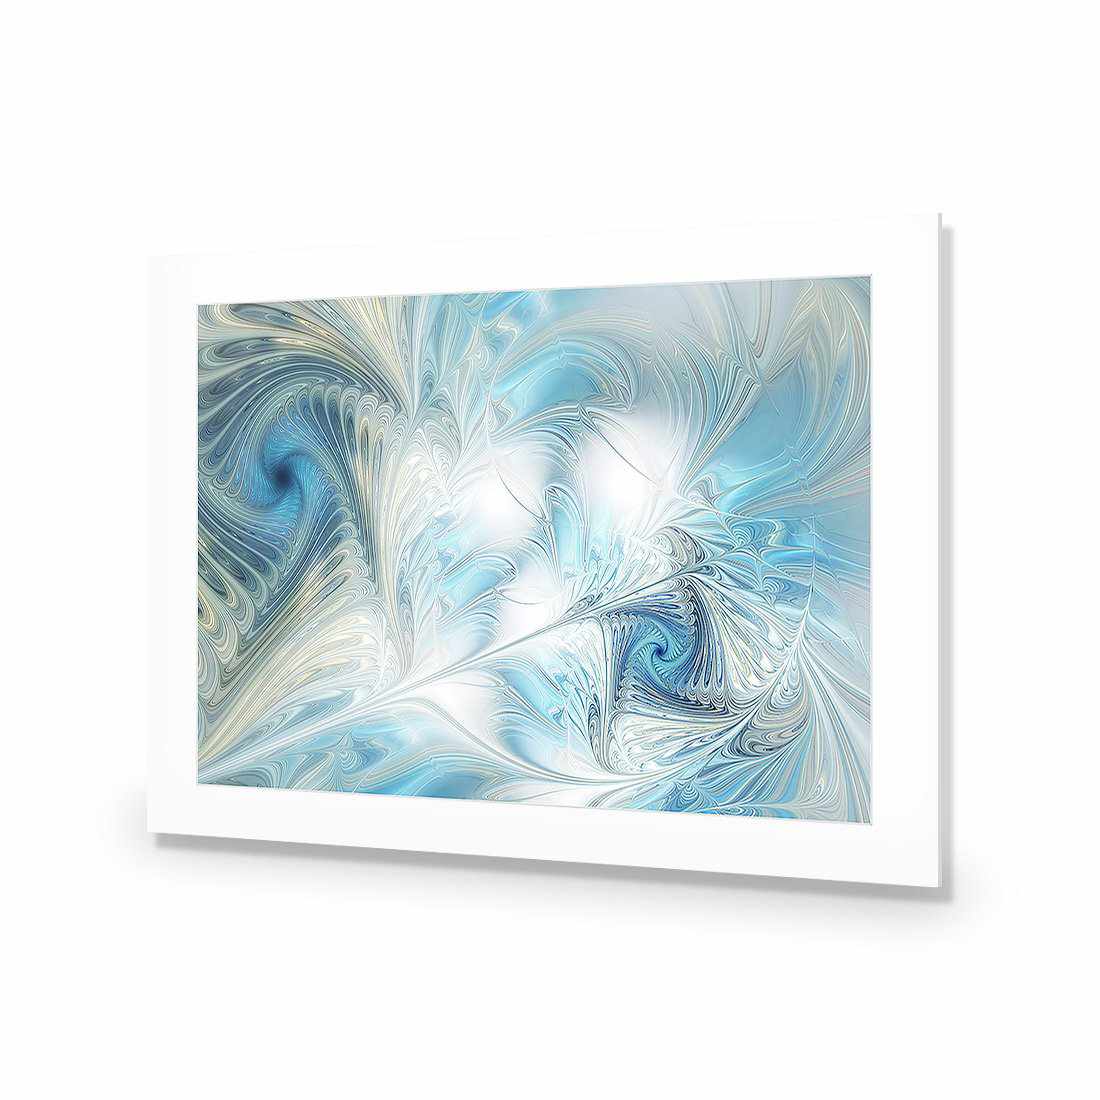 Travesty-Acrylic-Wall Art Design-With Border-Acrylic - No Frame-45x30cm-Wall Art Designs